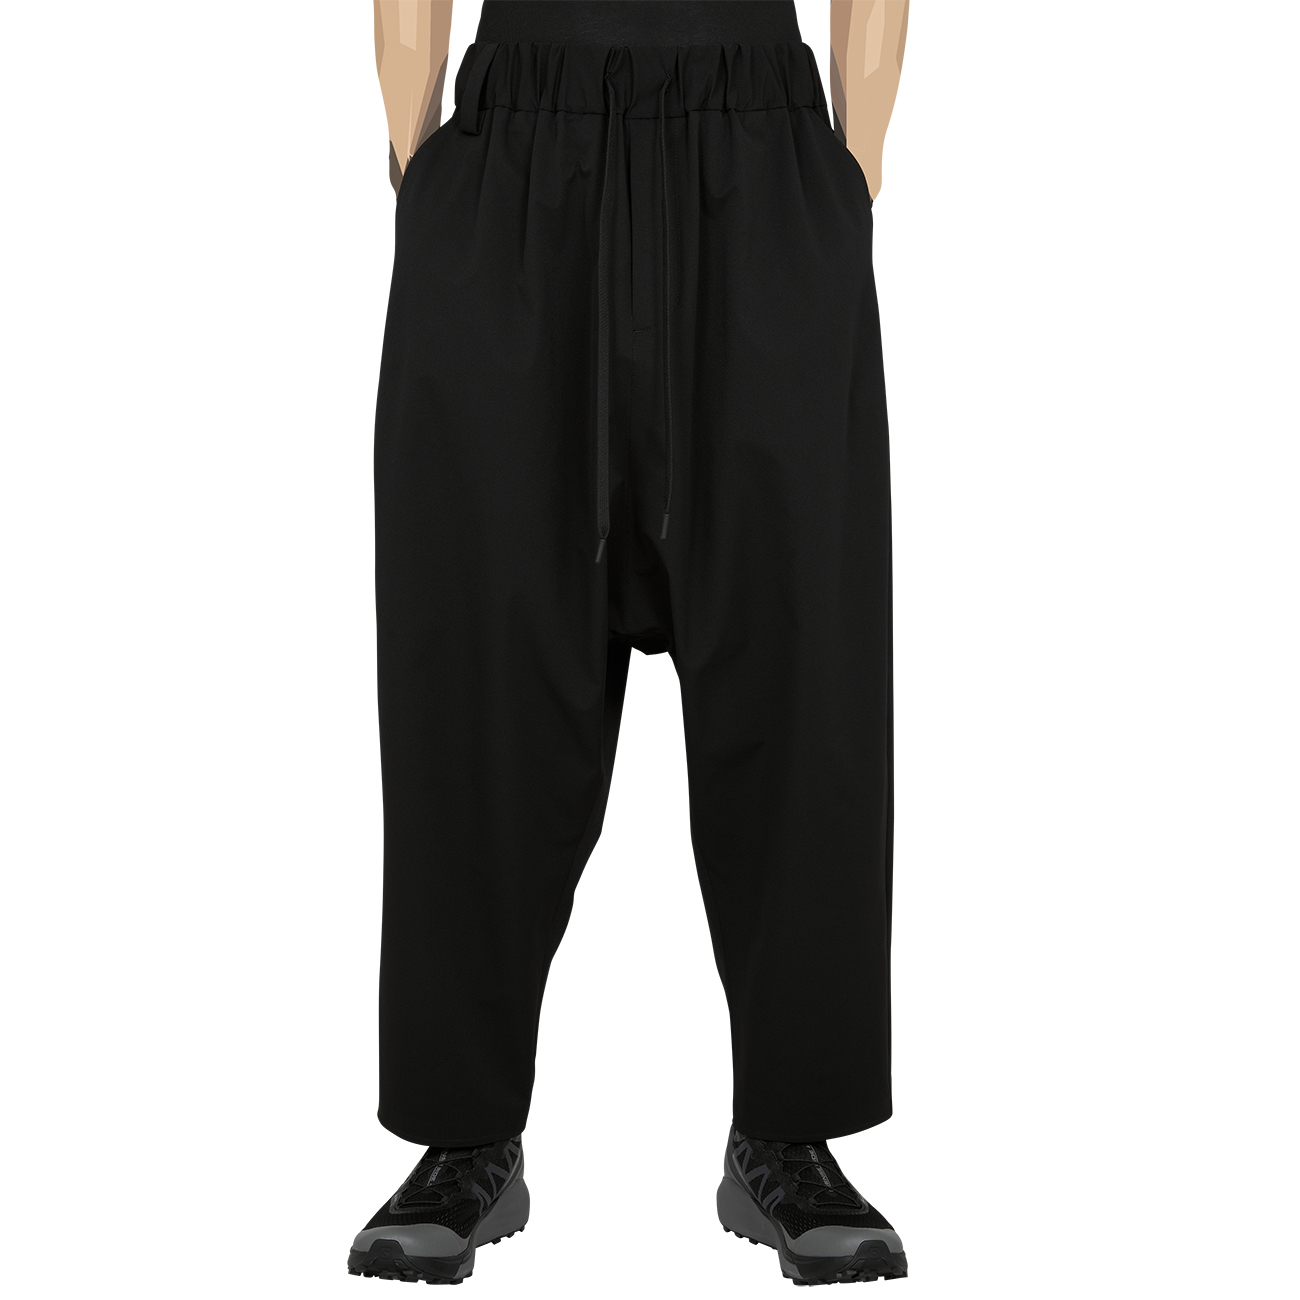 WHITE MOUNTAINEERING BLK (ホワイトマウンテニアリング ビーエルケー) - 22AW STRETCHED SARROUEL PANTS BLACKの詳細画像3